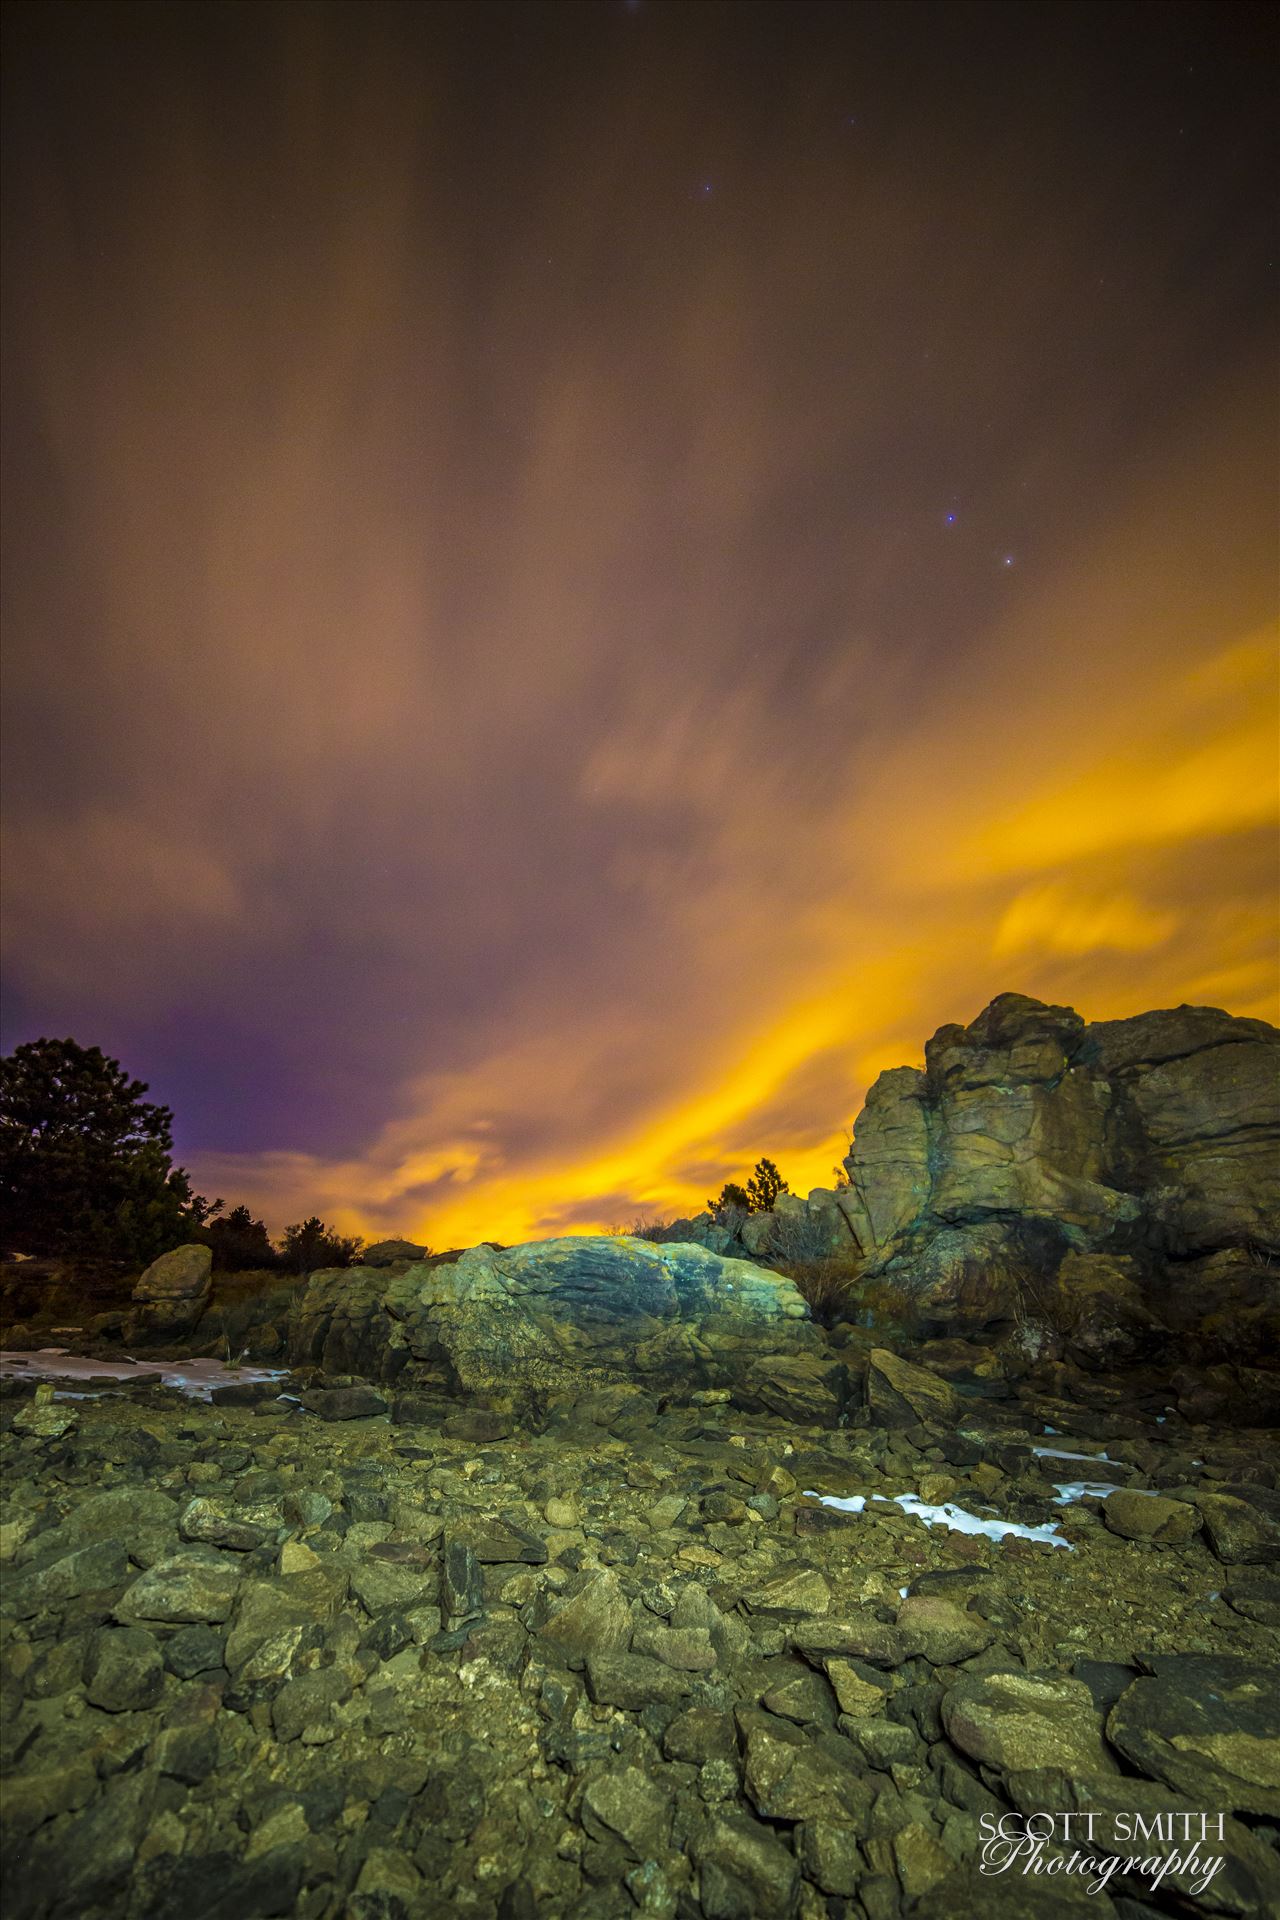 Night Sky on Fire at Mary's Lake | Astrophotography | Scott Smith ...